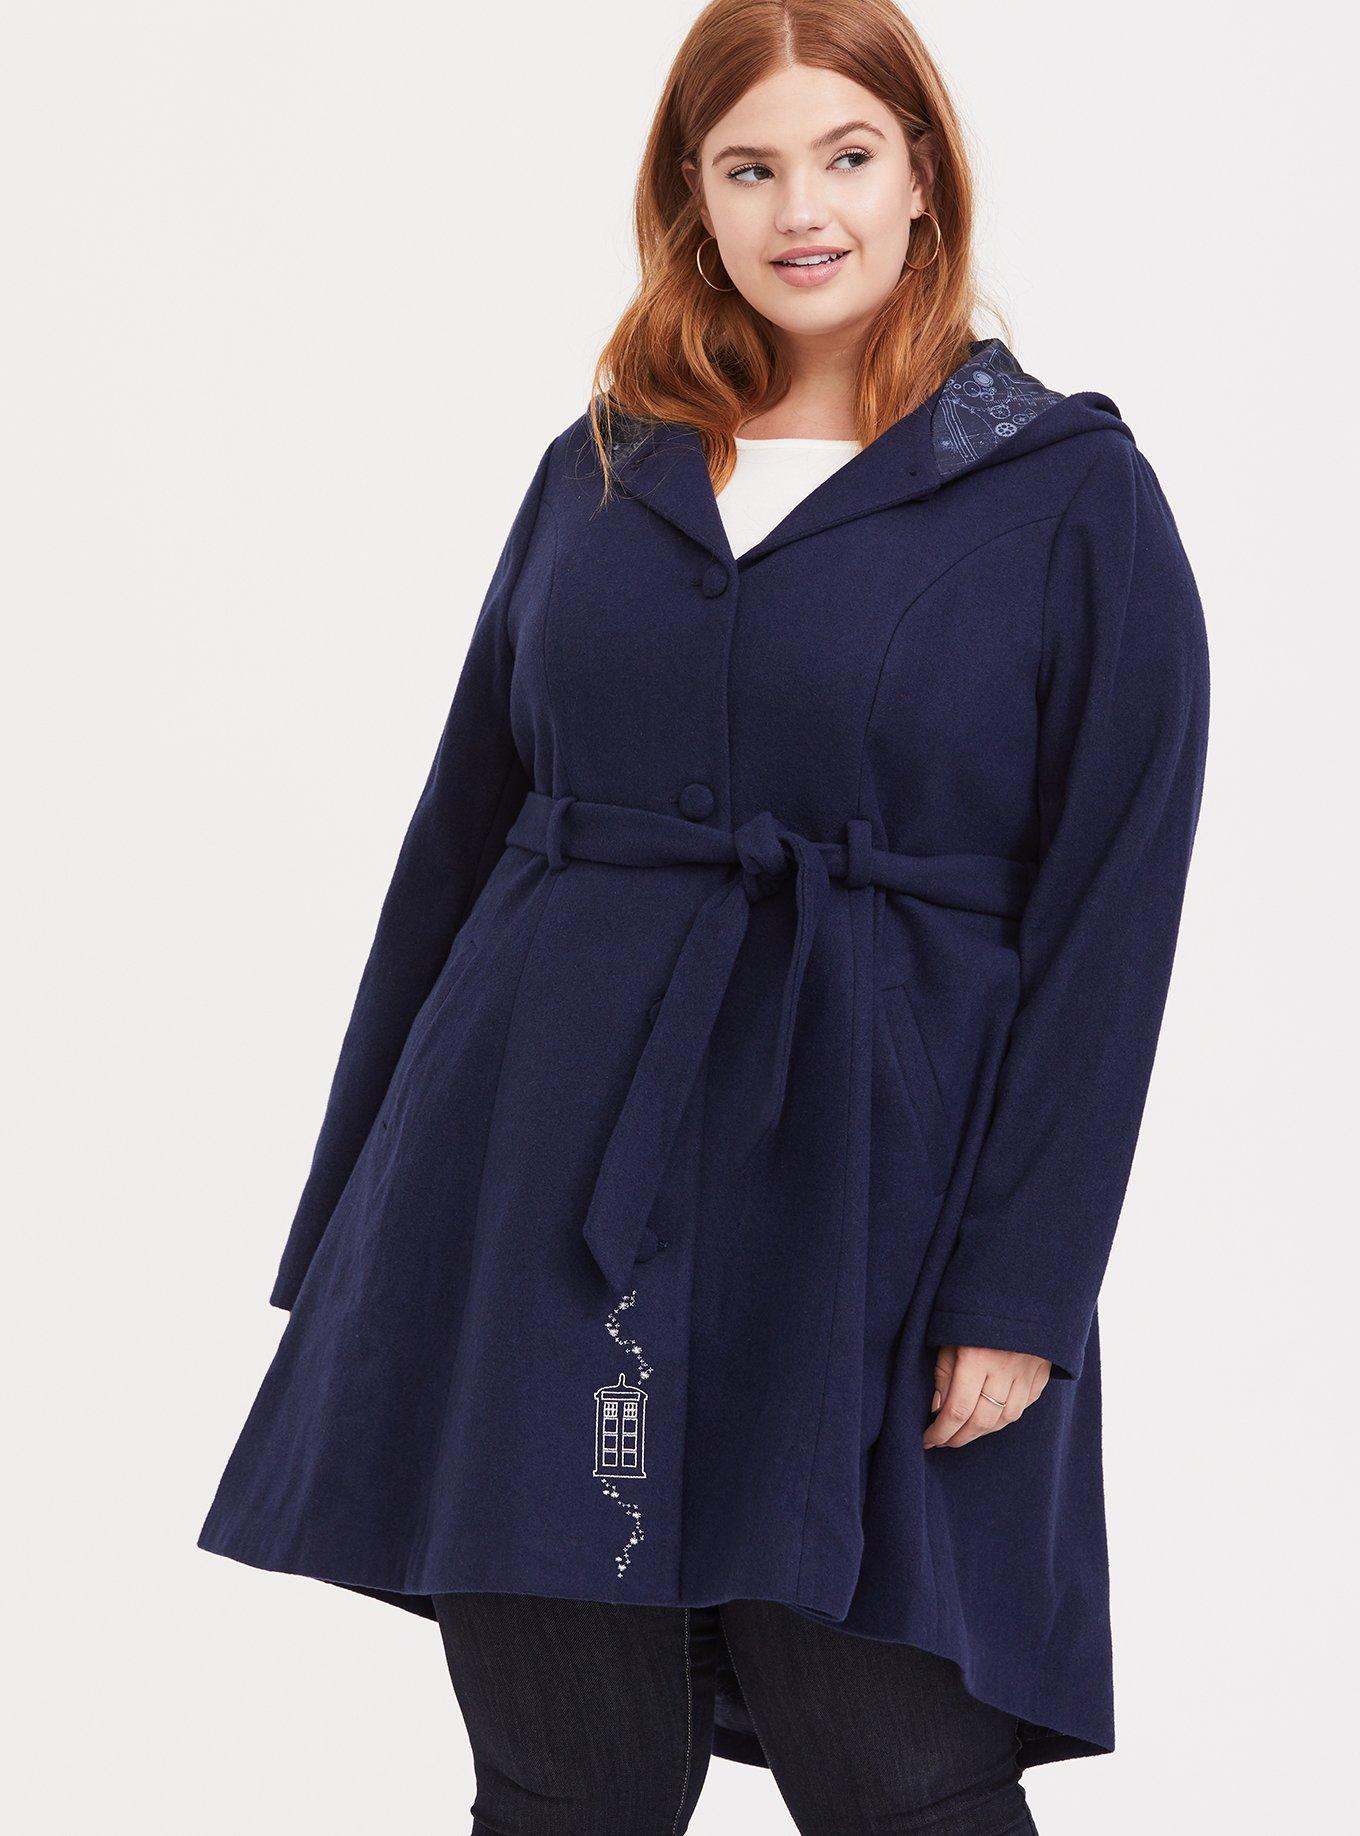 Plus Size - Her Universe Doctor Who TARDIS Blue Hooded Fit & Flare